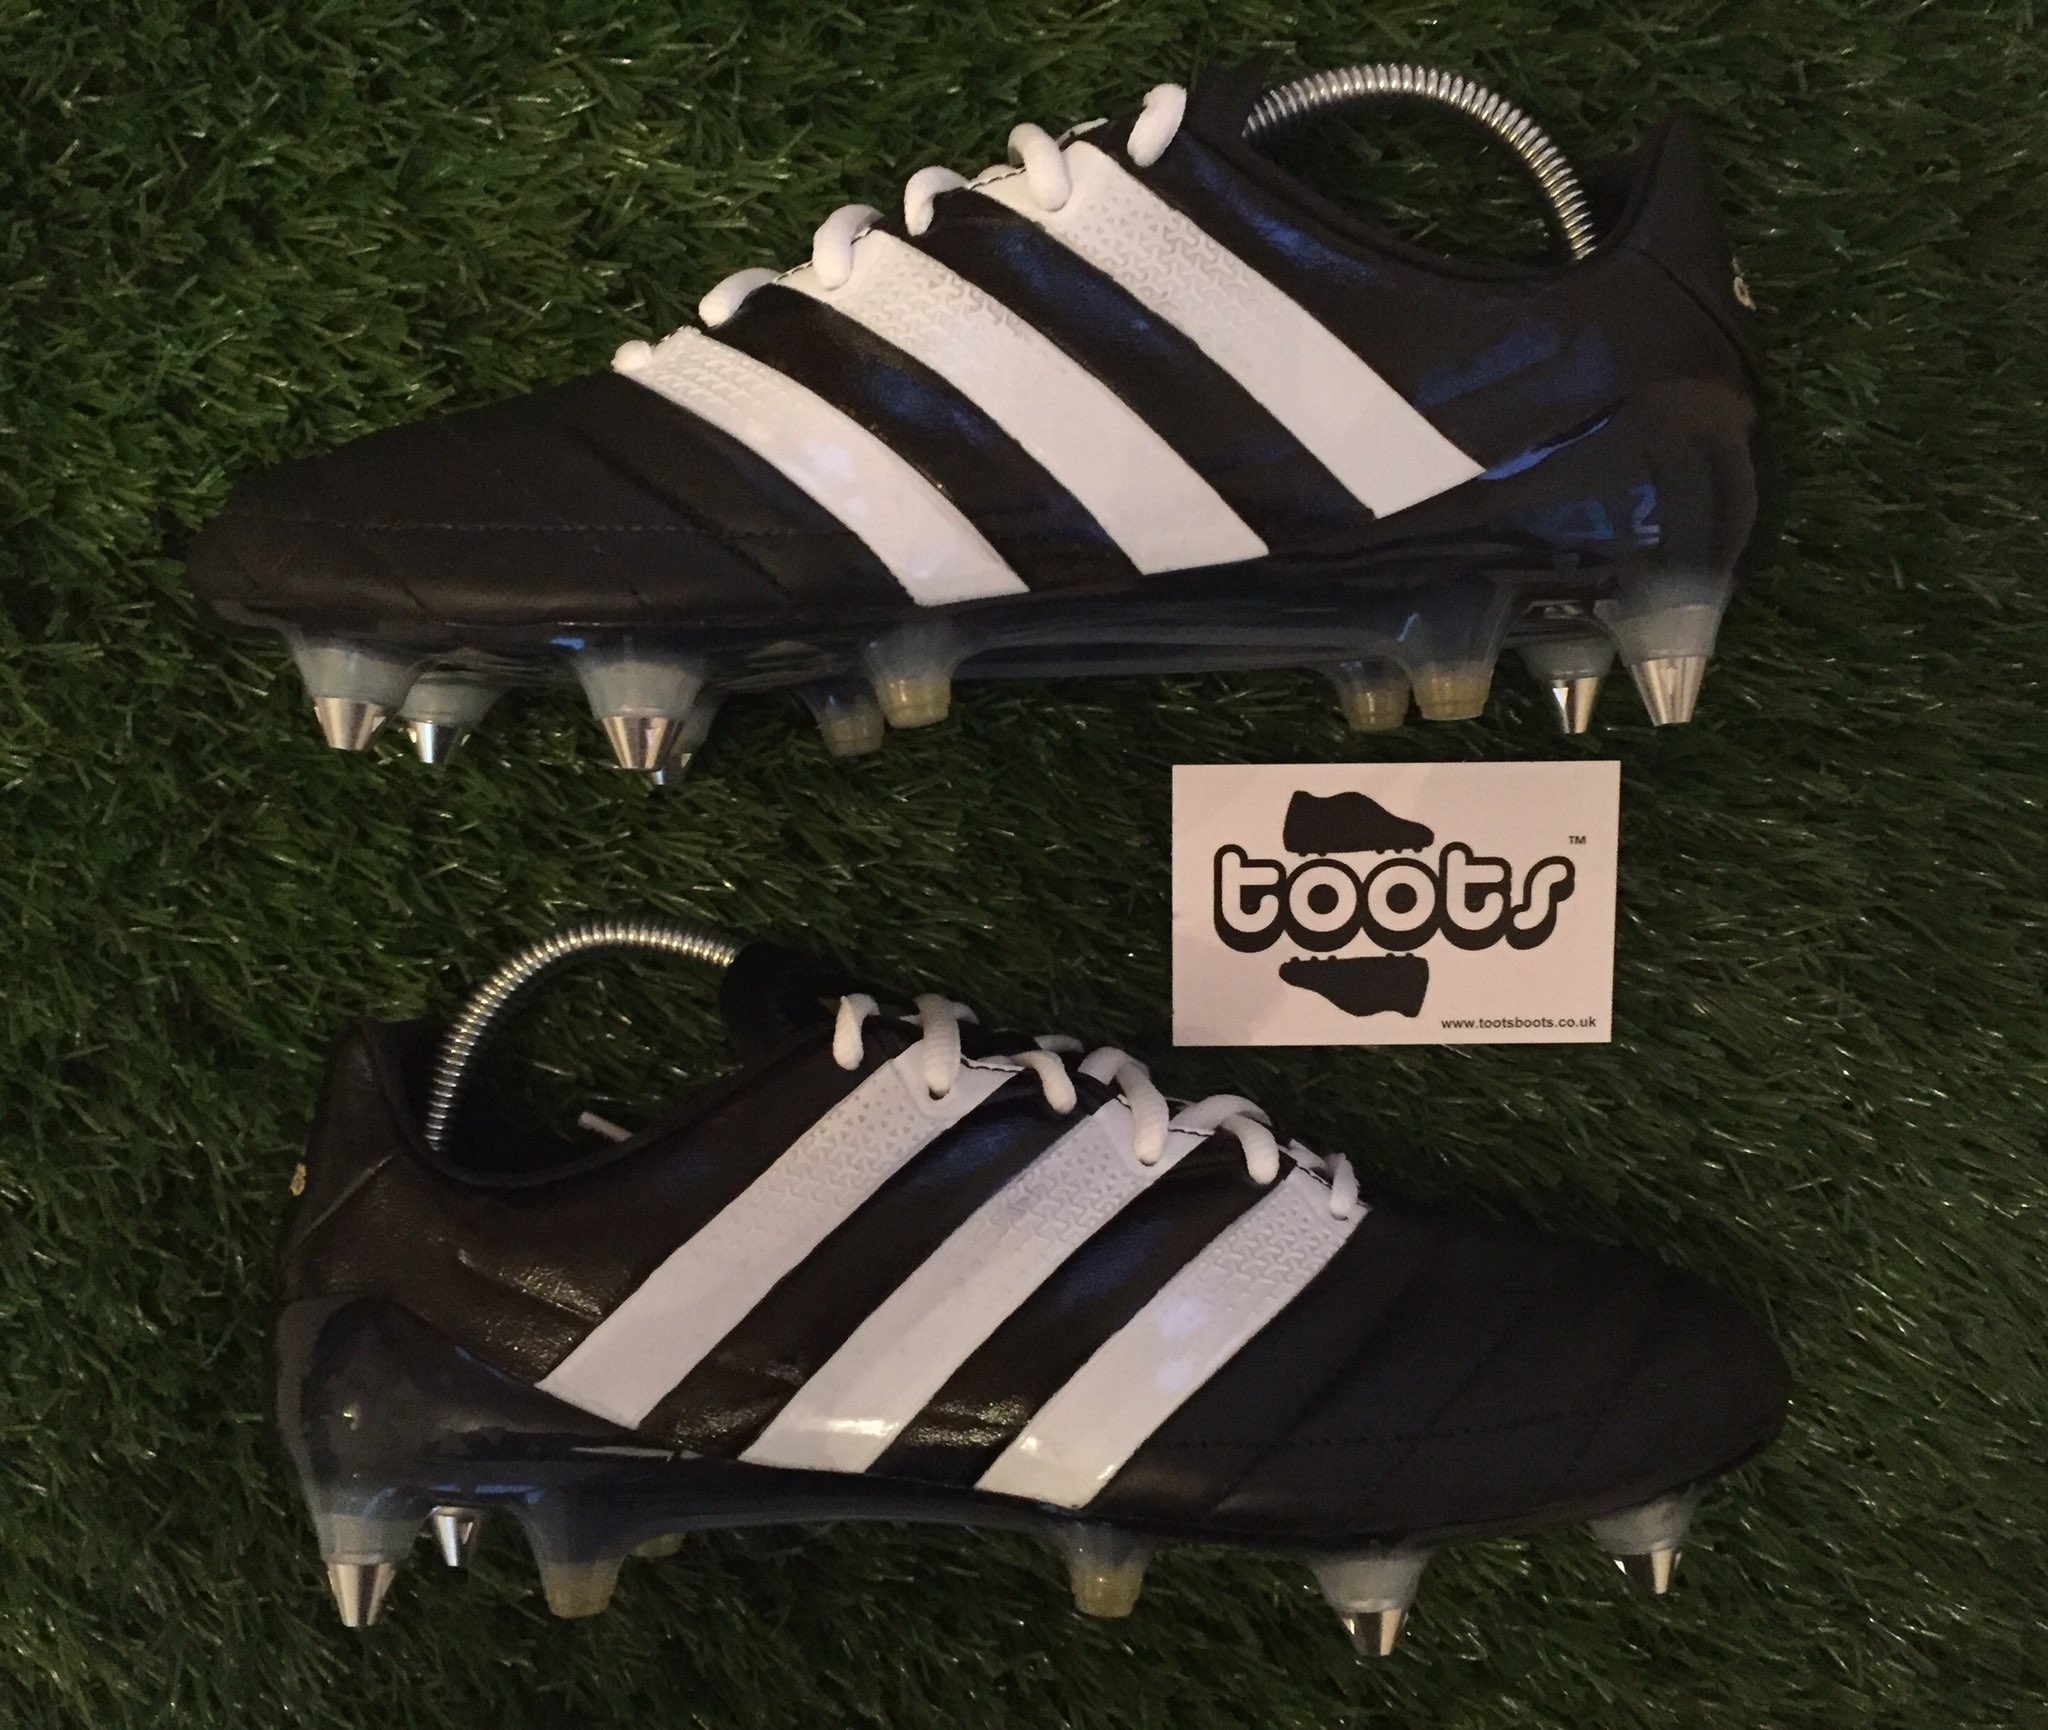 tootsboots on Twitter: "Adidas Ace 16.1 SG Leather, Custom BlackOut with tootsboots Performance Laces UK8 just £114.99 including delivery!! #BlackOutFriday https://t.co/1HeiqDxUTJ" /